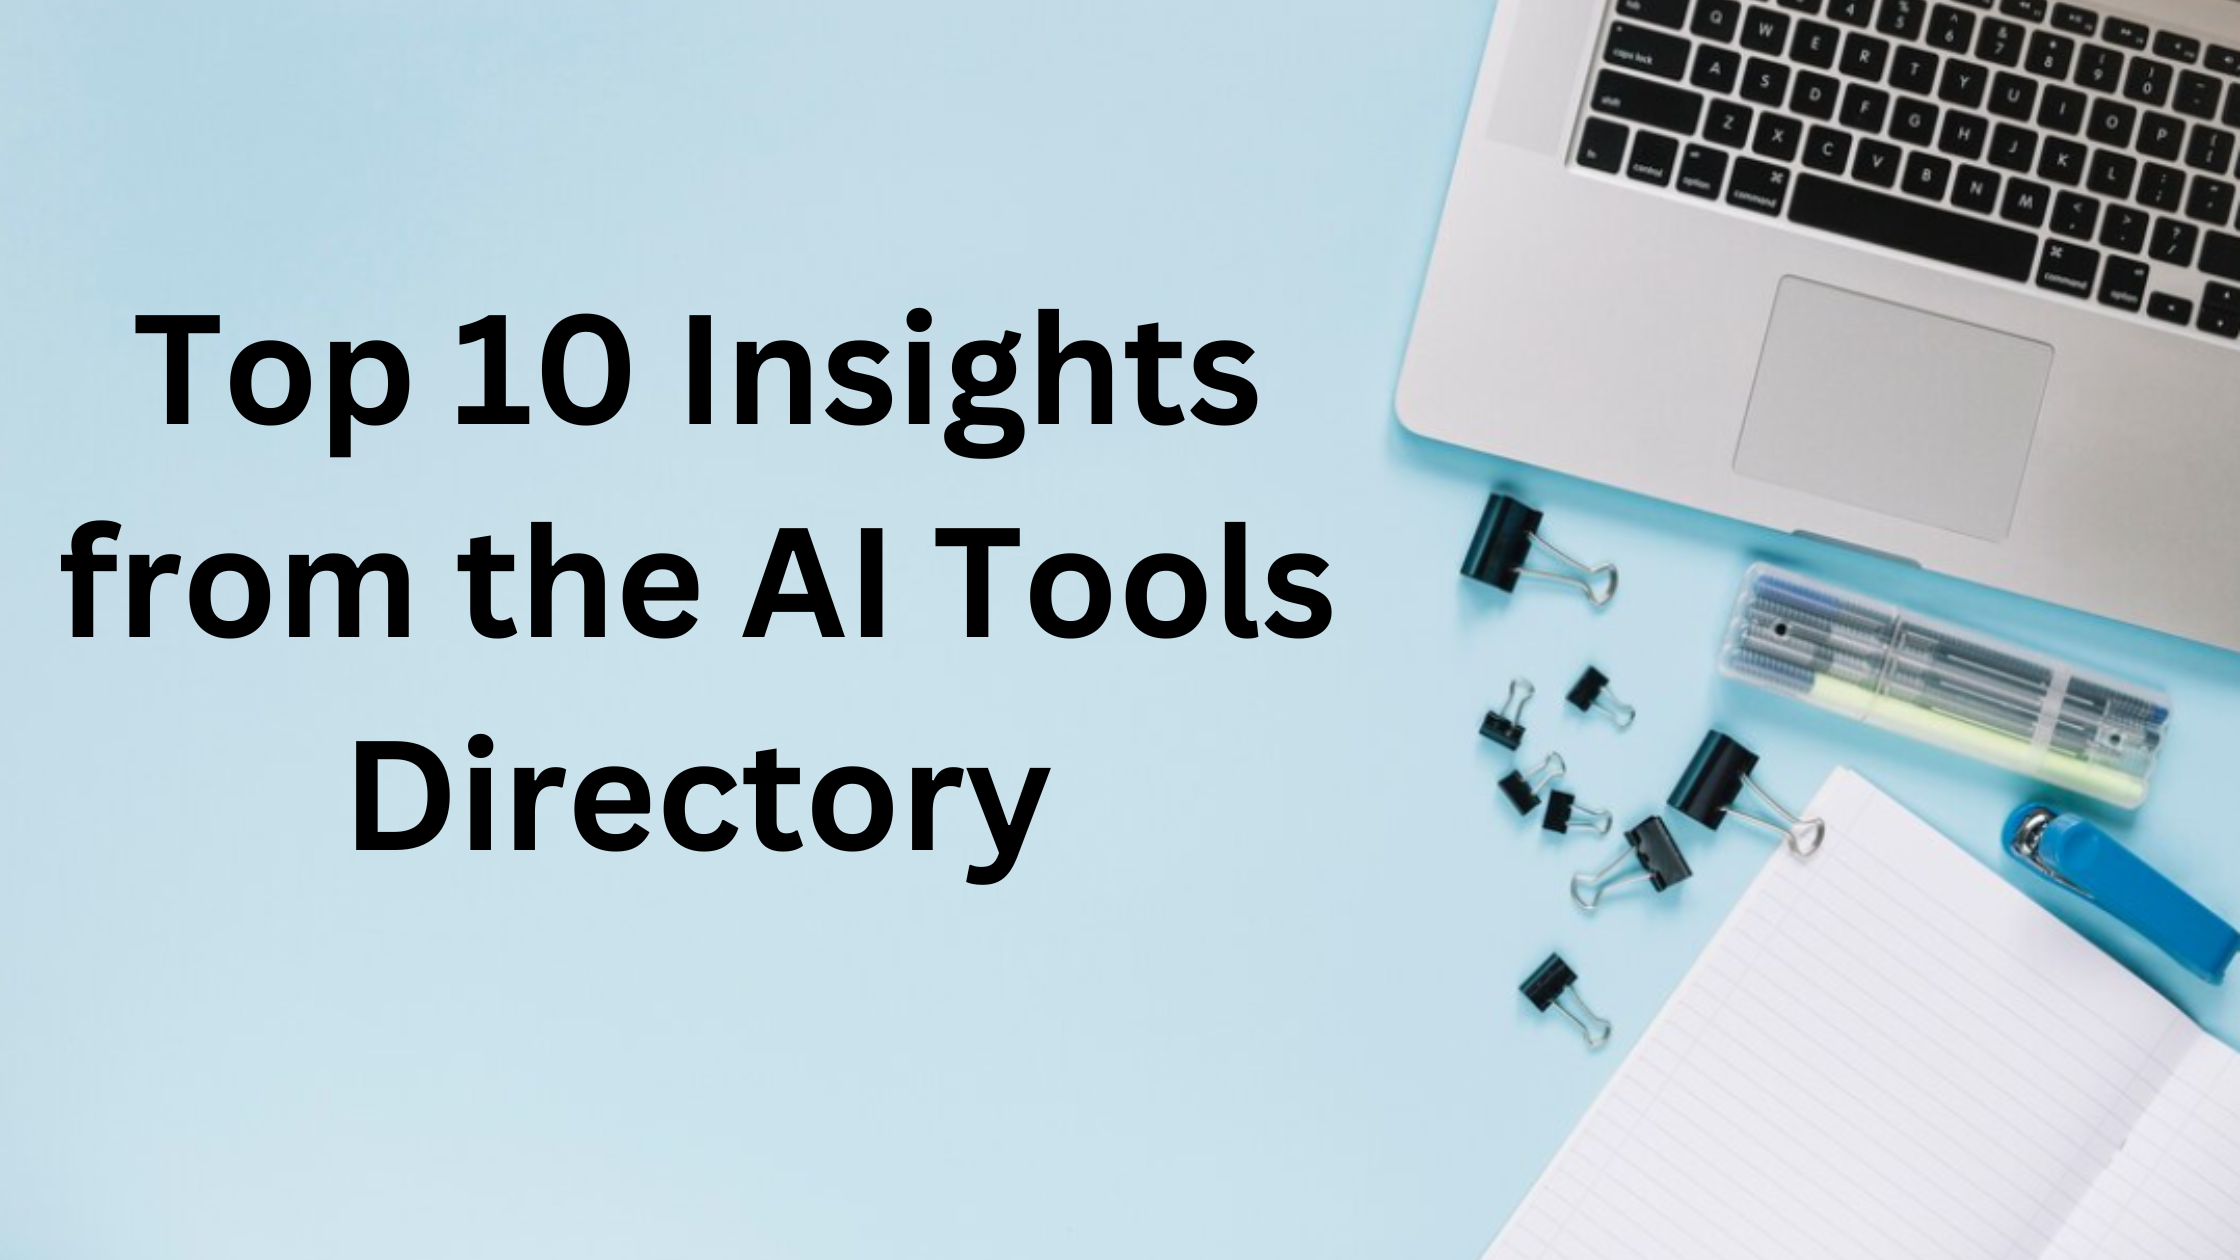 Cover Image for Top 10 Insights from the AI Tools Directory